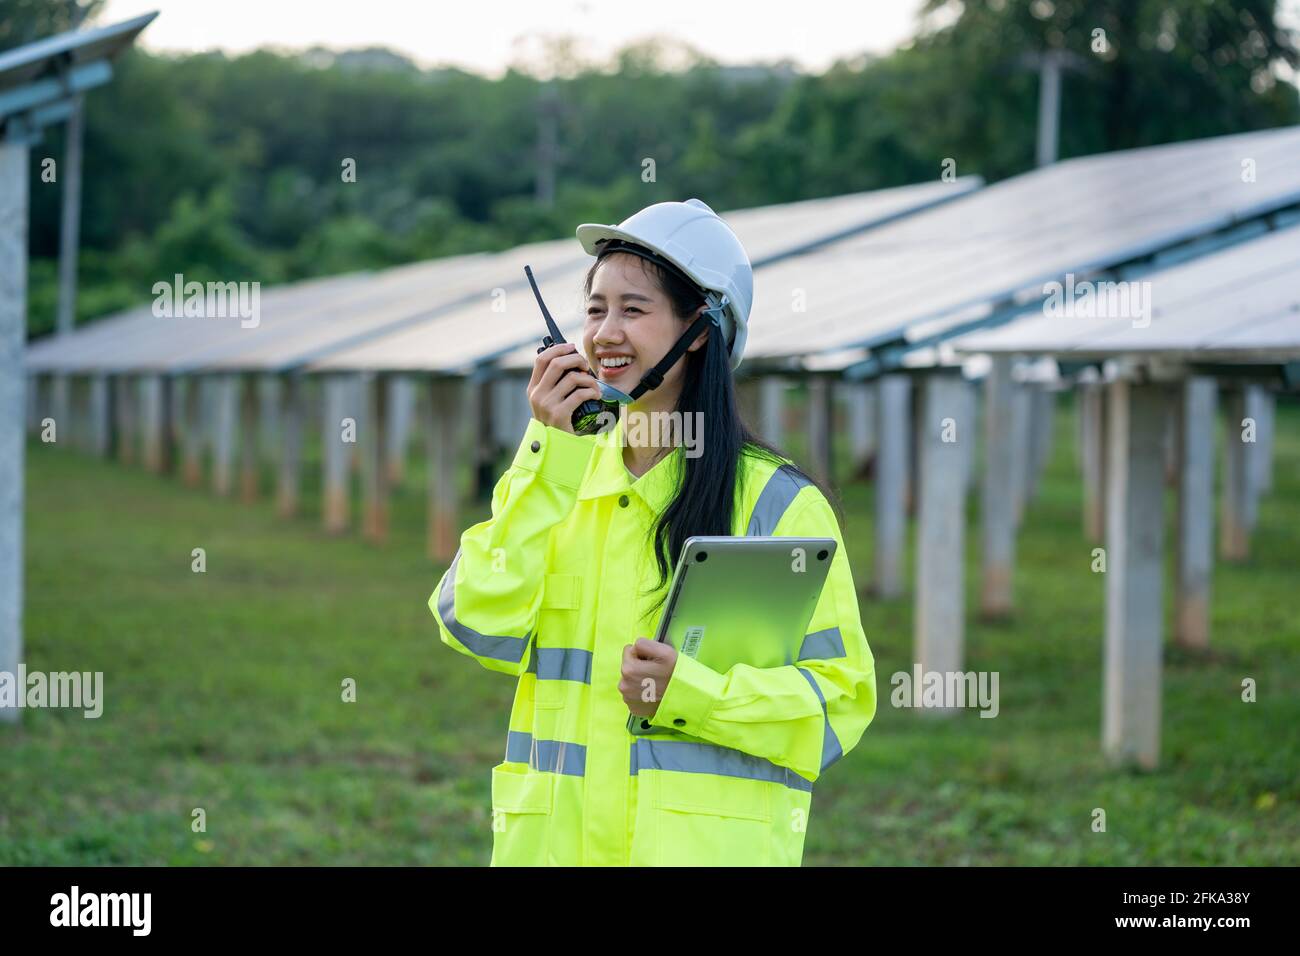 Engineer women wearing safety vest and safety helmet use radio Stock Photo